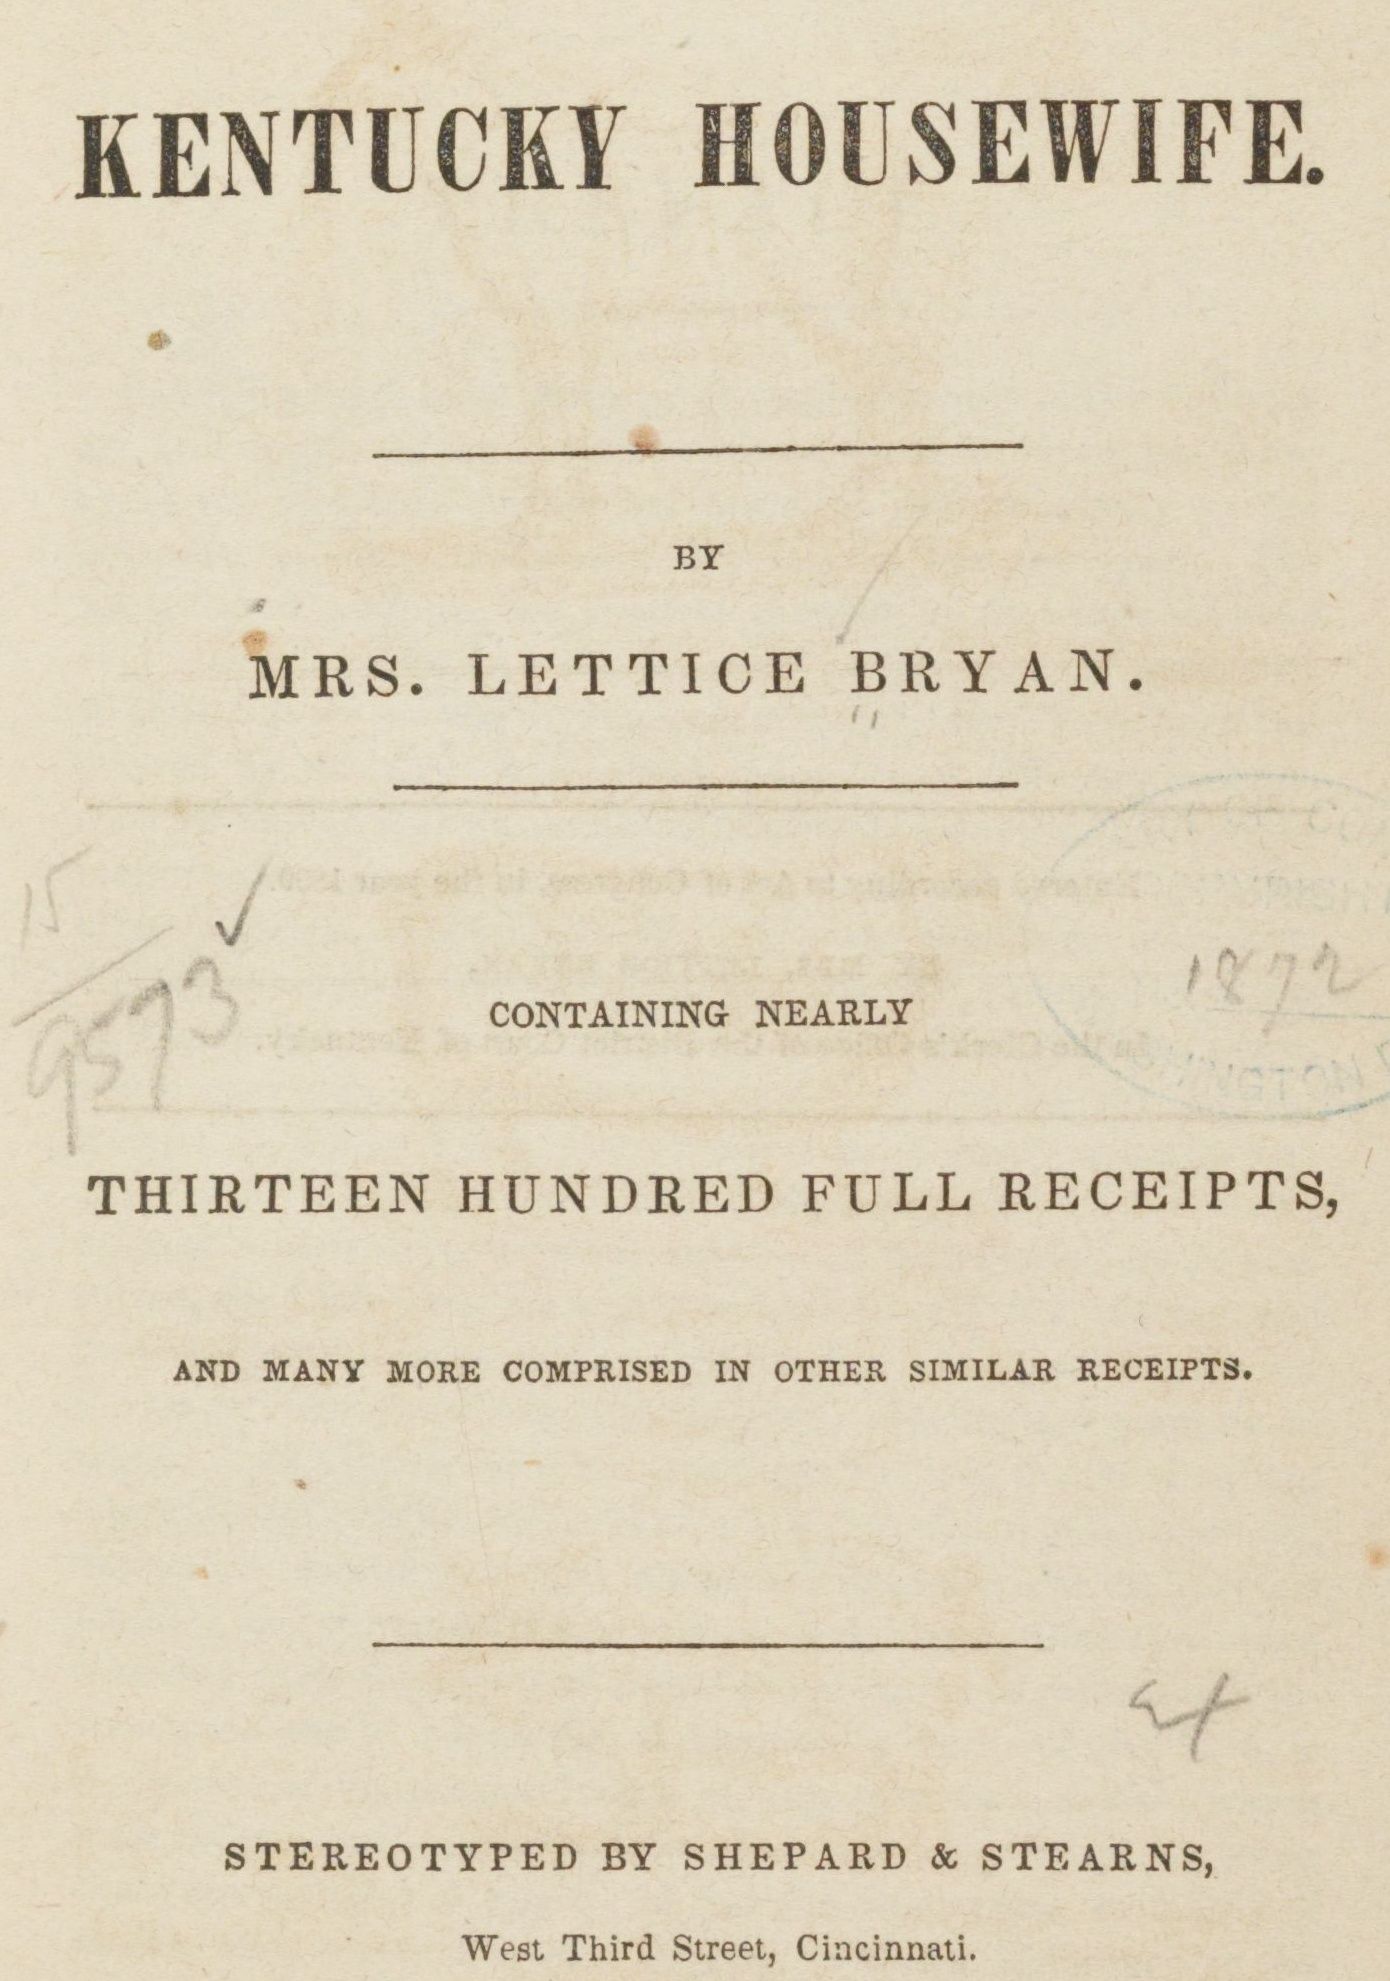 Cover of the Kentucky Housewife by Lettice Bryan, 1839